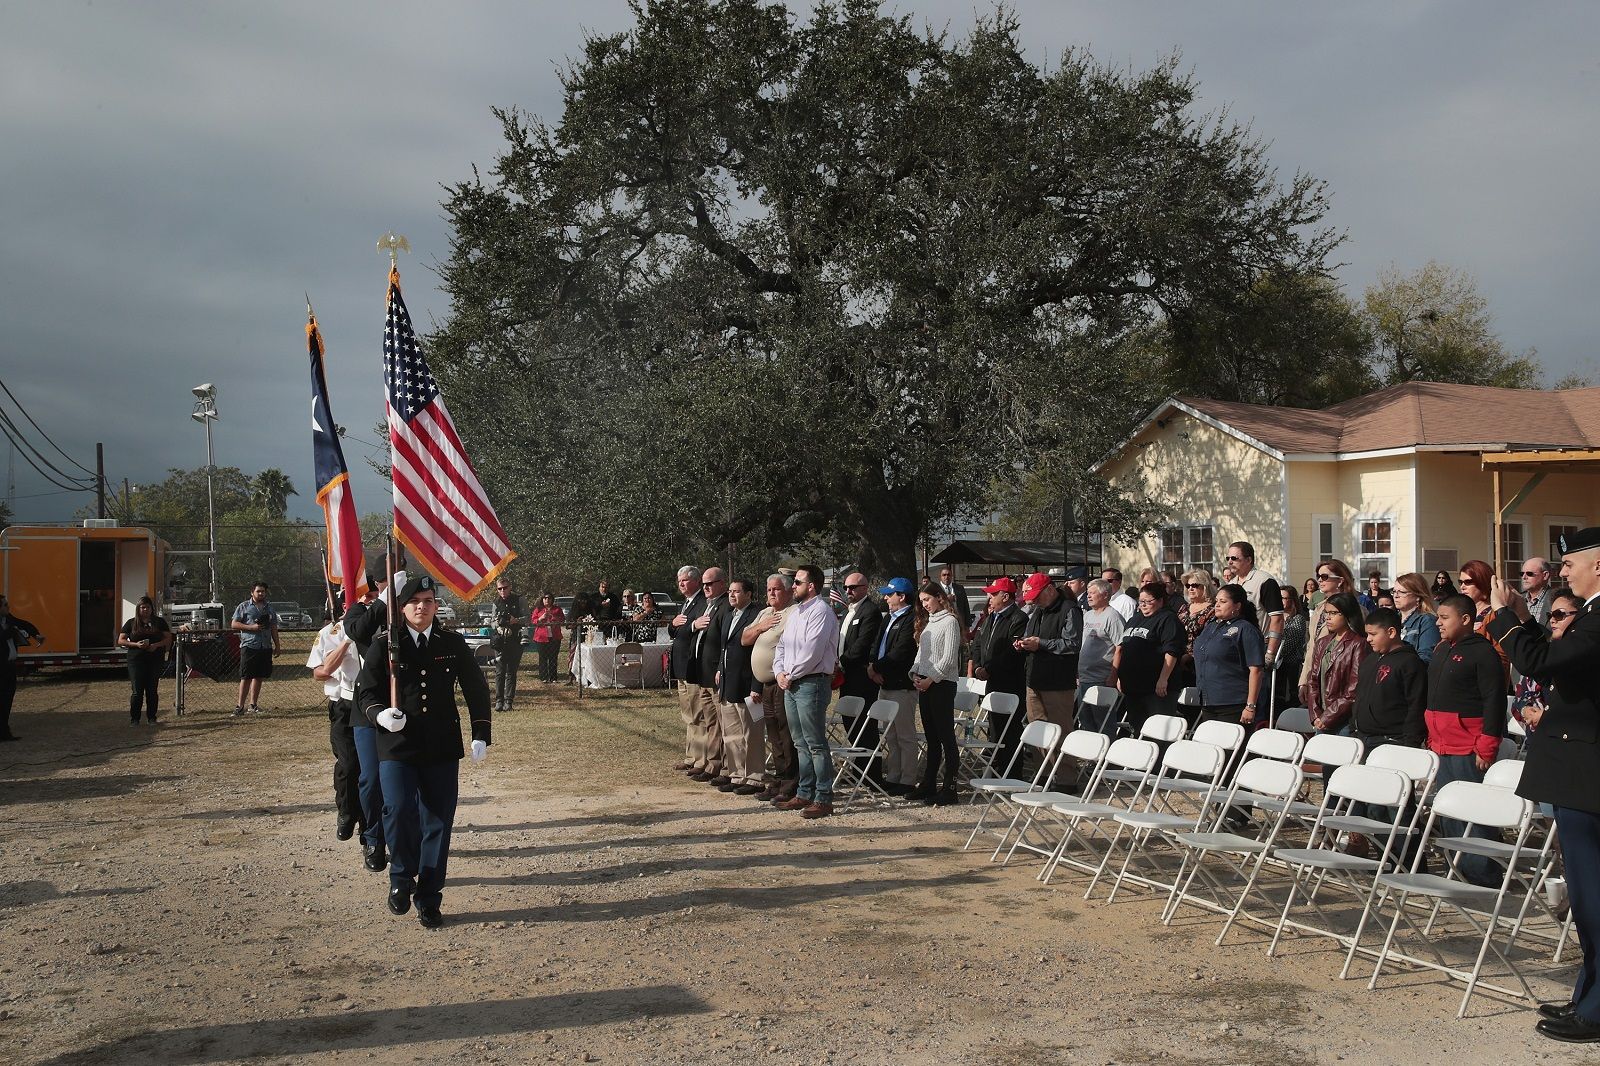 SUTHERLAND SPRINGS, TX - NOVEMBER 11:  A color guard presents colors during a Veterans Day ceremony outside the town's Community Center on November 11, 2017 in Sutherland Springs, Texas. Residents of the community are still trying to heal following the shooting at the First Baptist Church of Sutherland on November 5. Devin Patrick Kelley shot and killed 26 people and wounded 20 others when he opened fire during Sunday service at the church.  (Photo by Scott Olson/Getty Images)